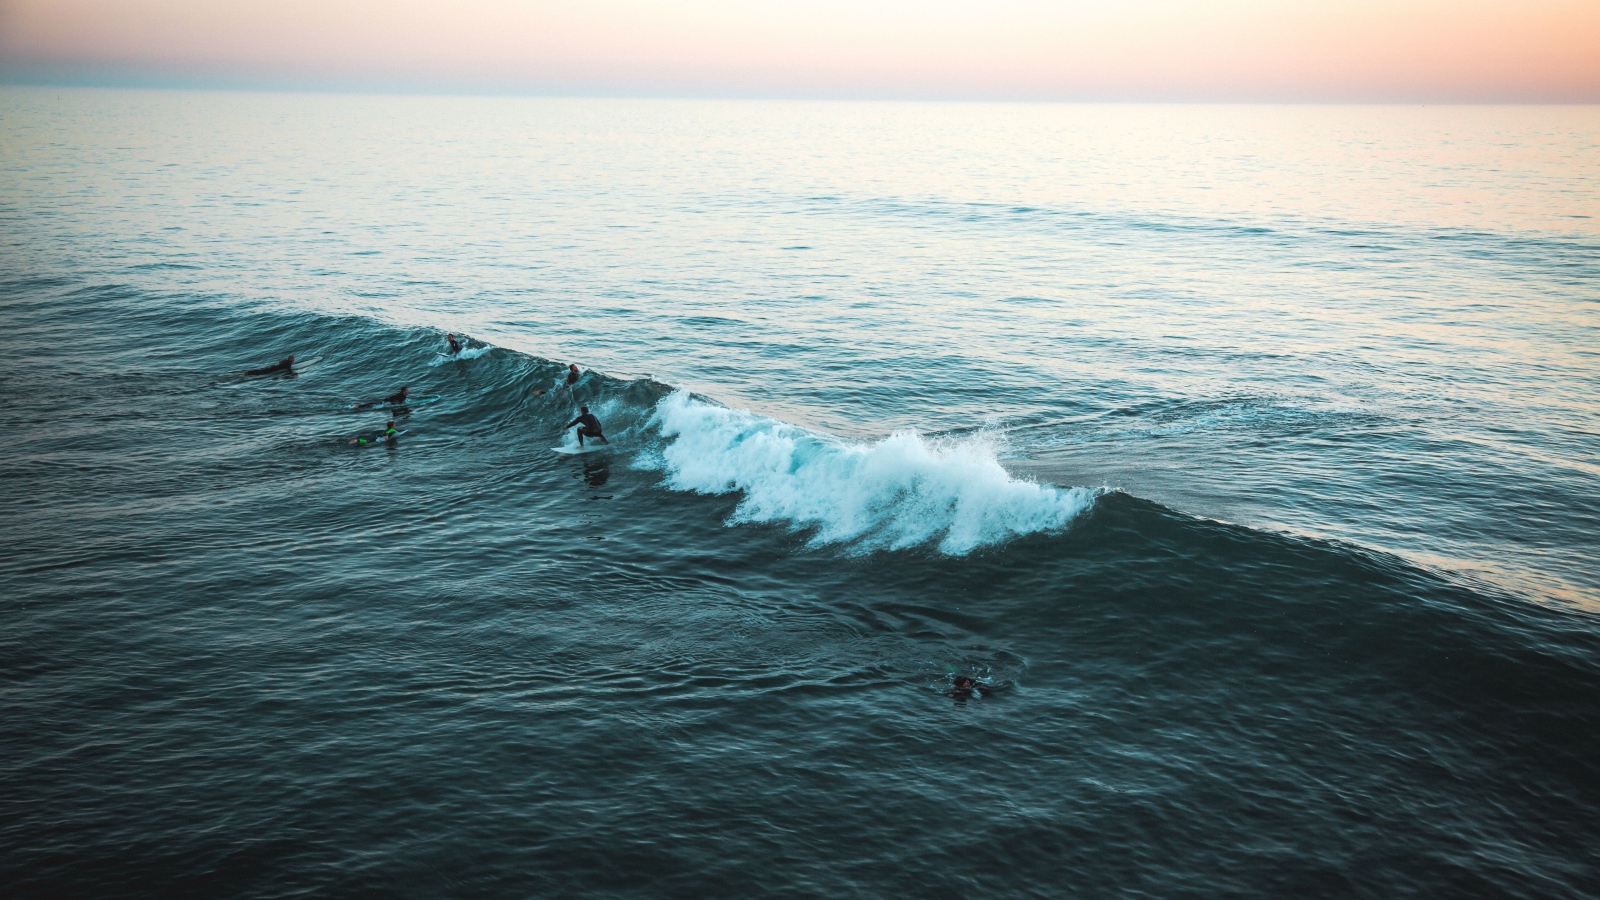 Surfers catch a wave in the sea